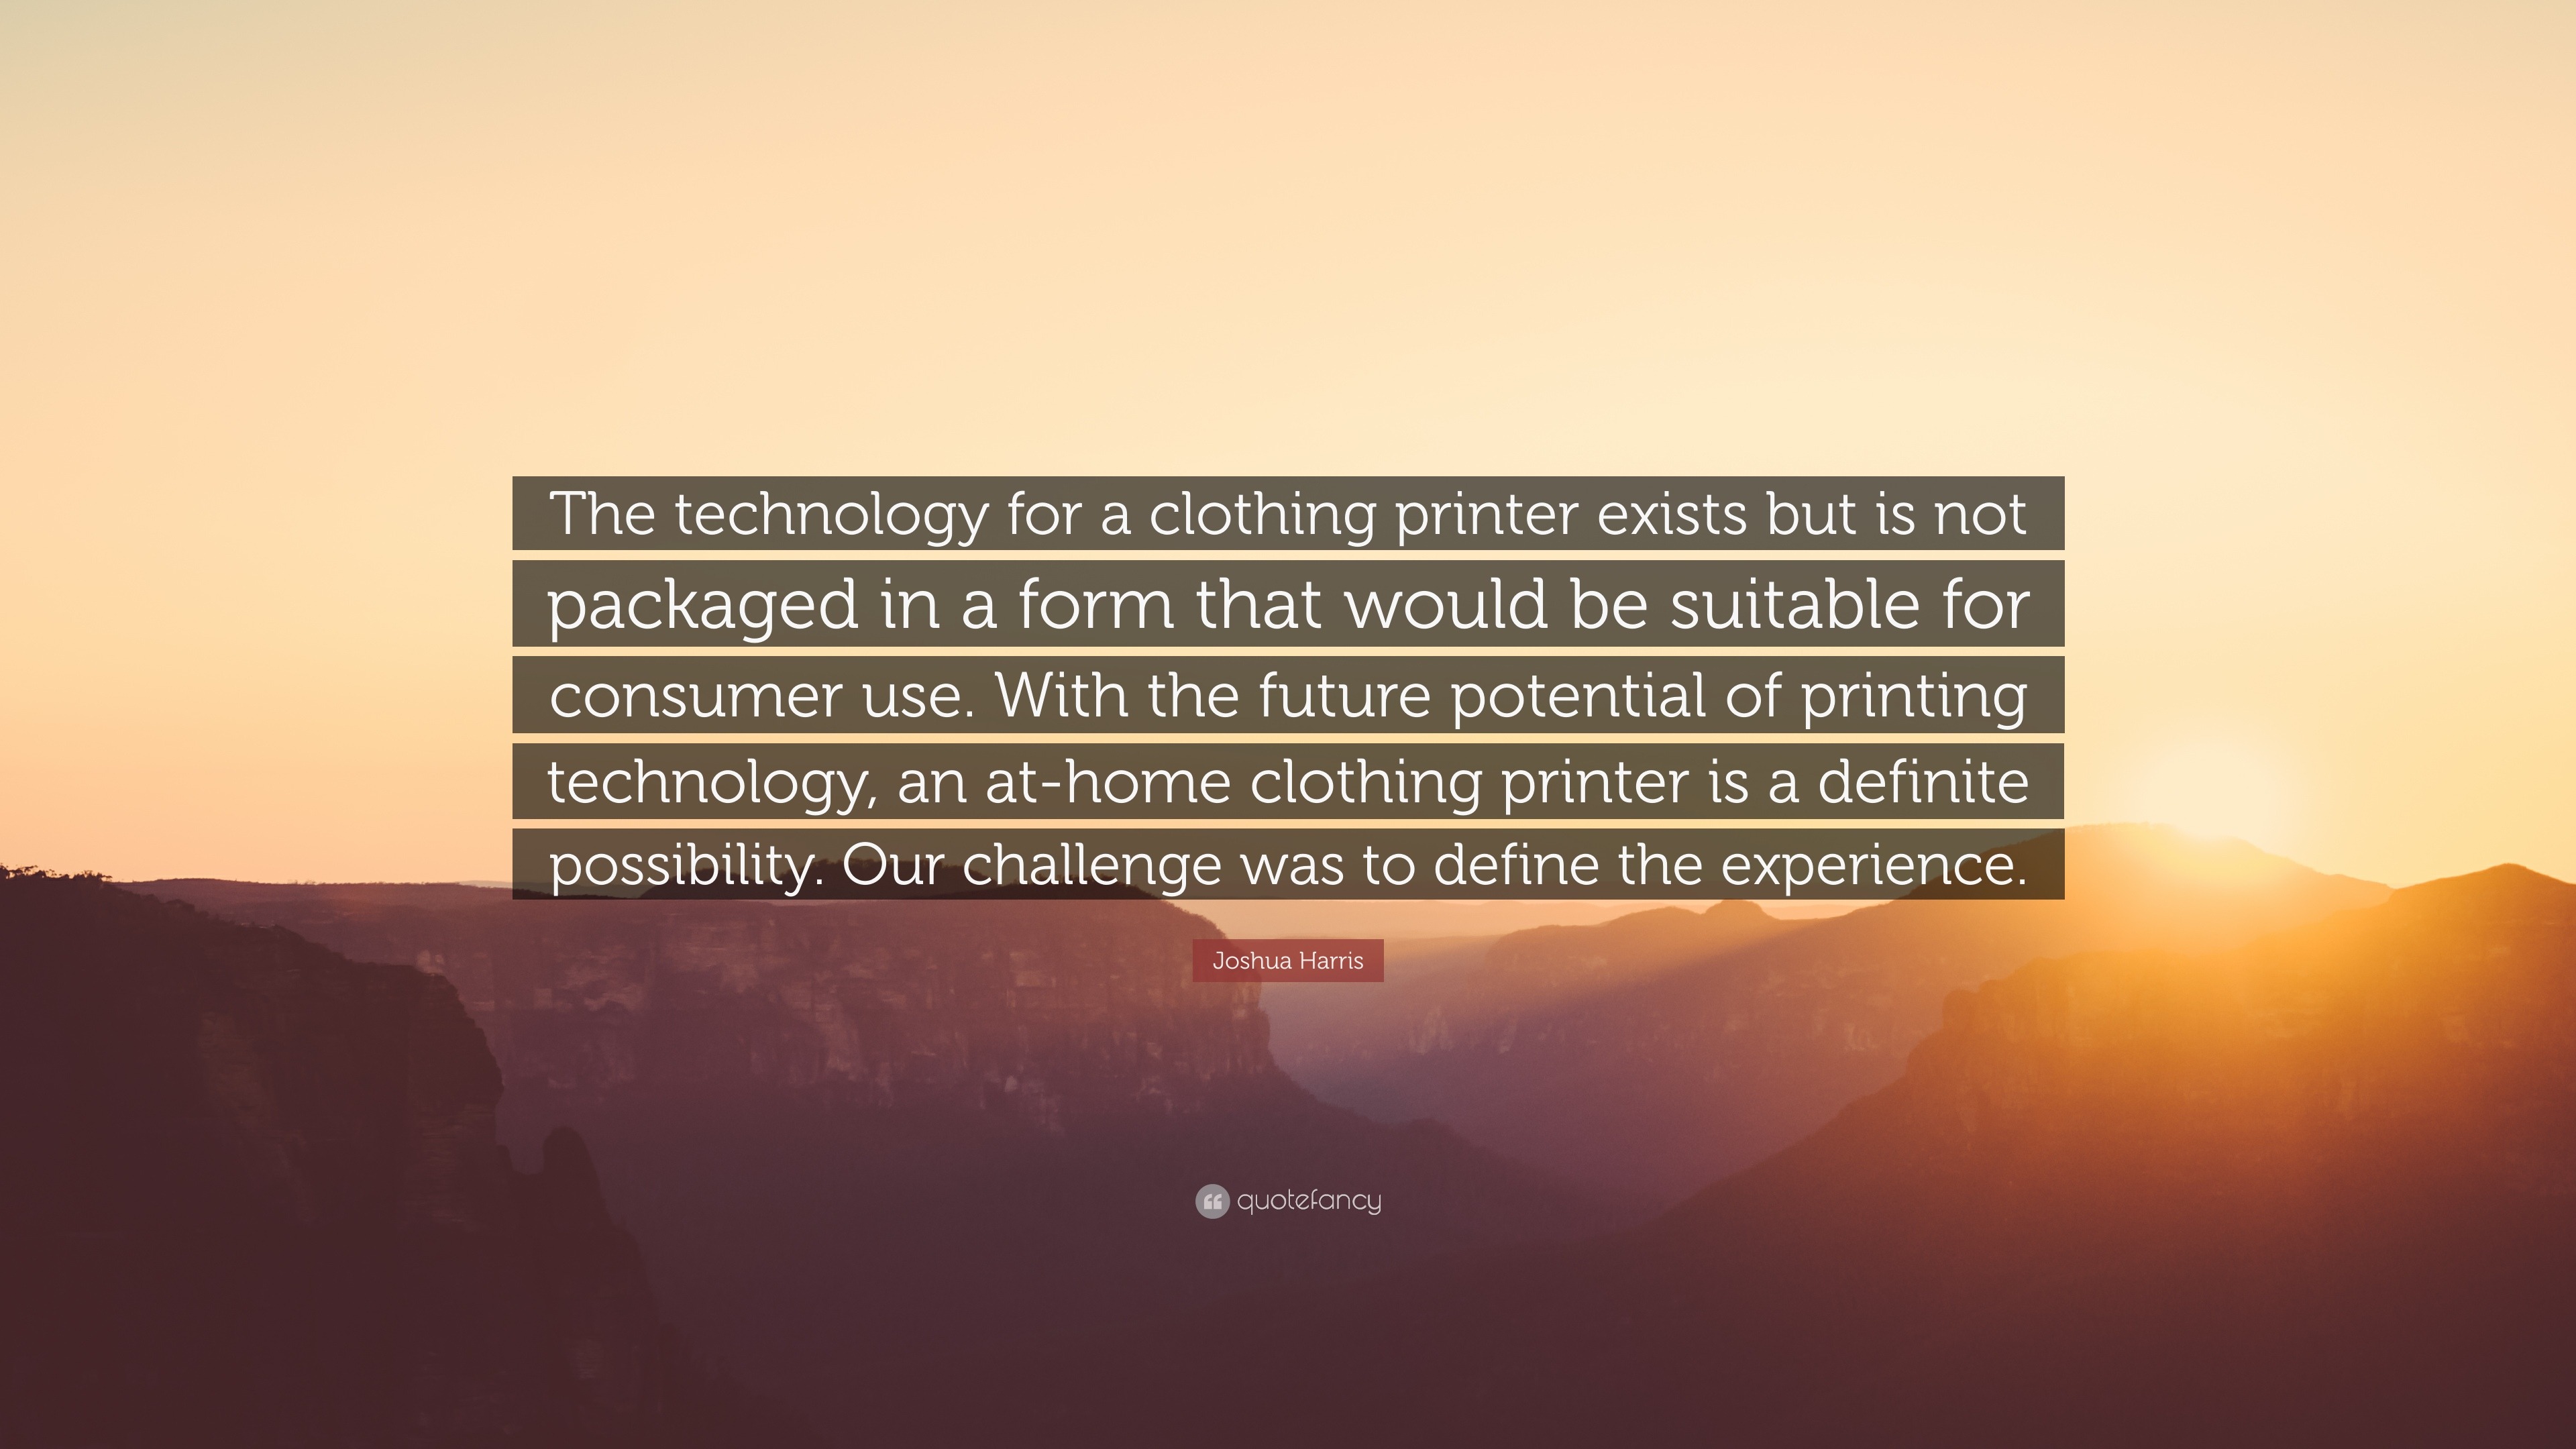 Joshua Harris Quote: “The technology for a clothing printer exists but is  not packaged in a form that would be suitable for consumer use. With”